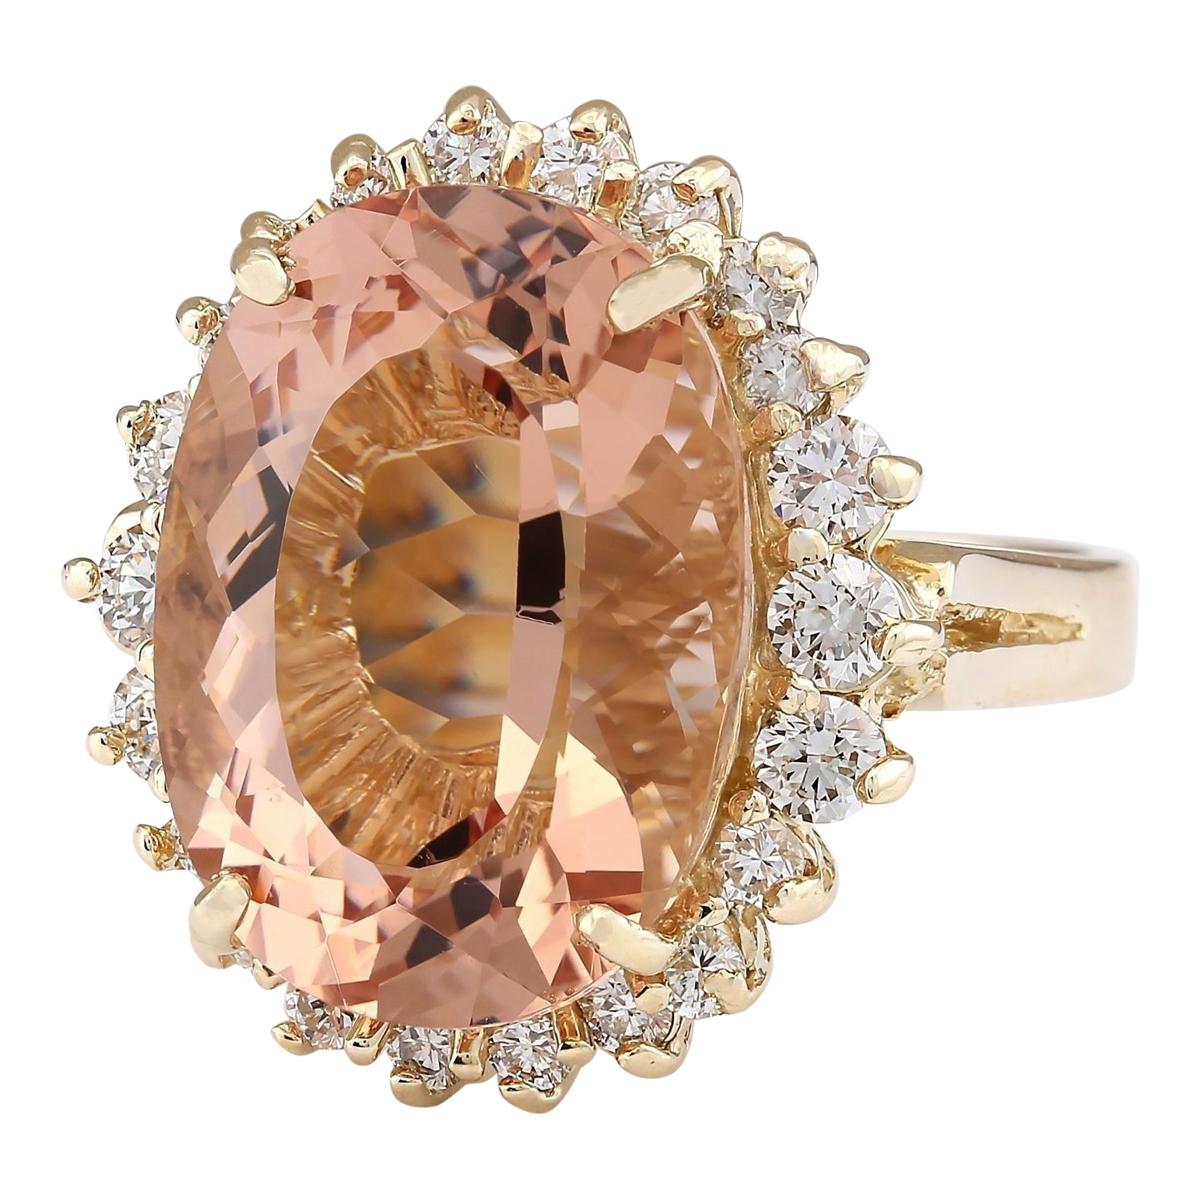 Stamped: 14K Yellow Gold
Total Ring Weight: 10.0 Grams
Total Natural Morganite Weight is 12.38 Carat (Measures: 18.00x13.00 mm)
Color: Peach
Total Natural Diamond Weight is 1.05 Carat
Color: F-G, Clarity: VS2-SI1
Face Measures: 22.00x19.80 mm
Sku: